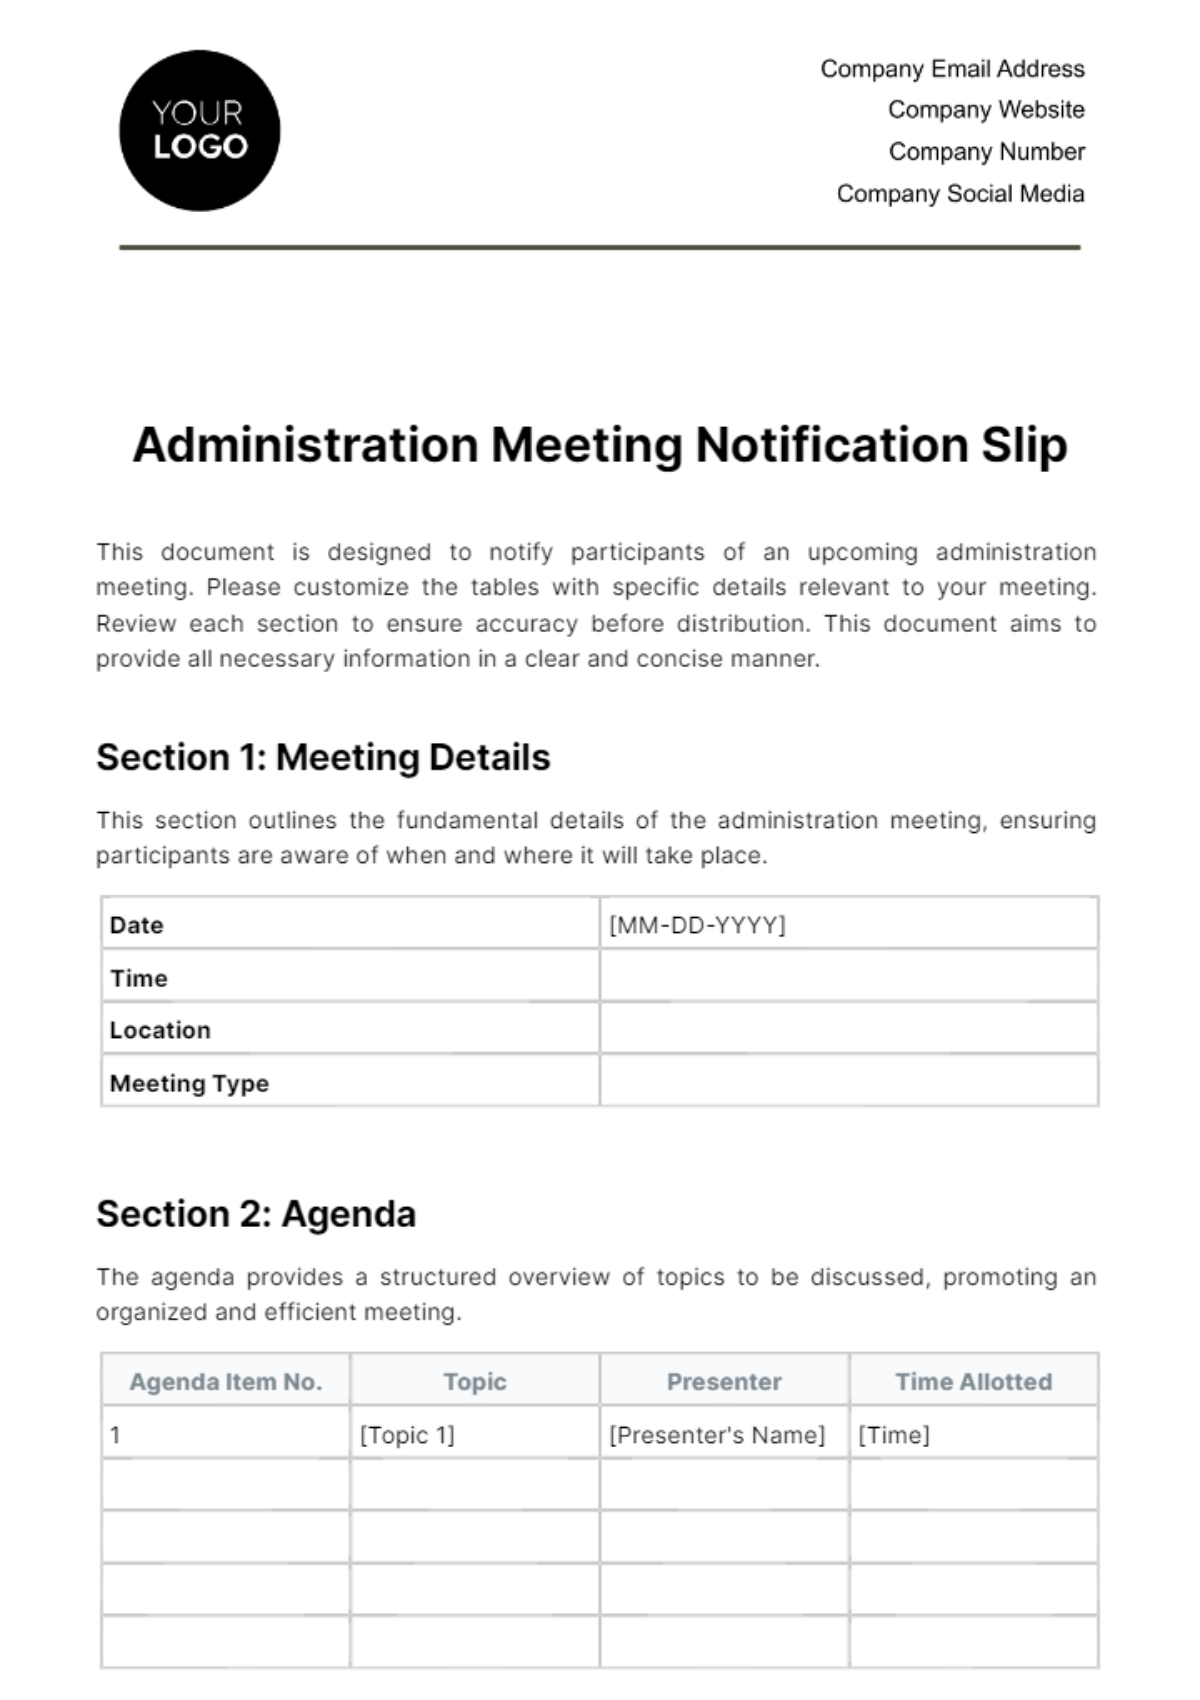 Free Administration Meeting Notification Slip Template